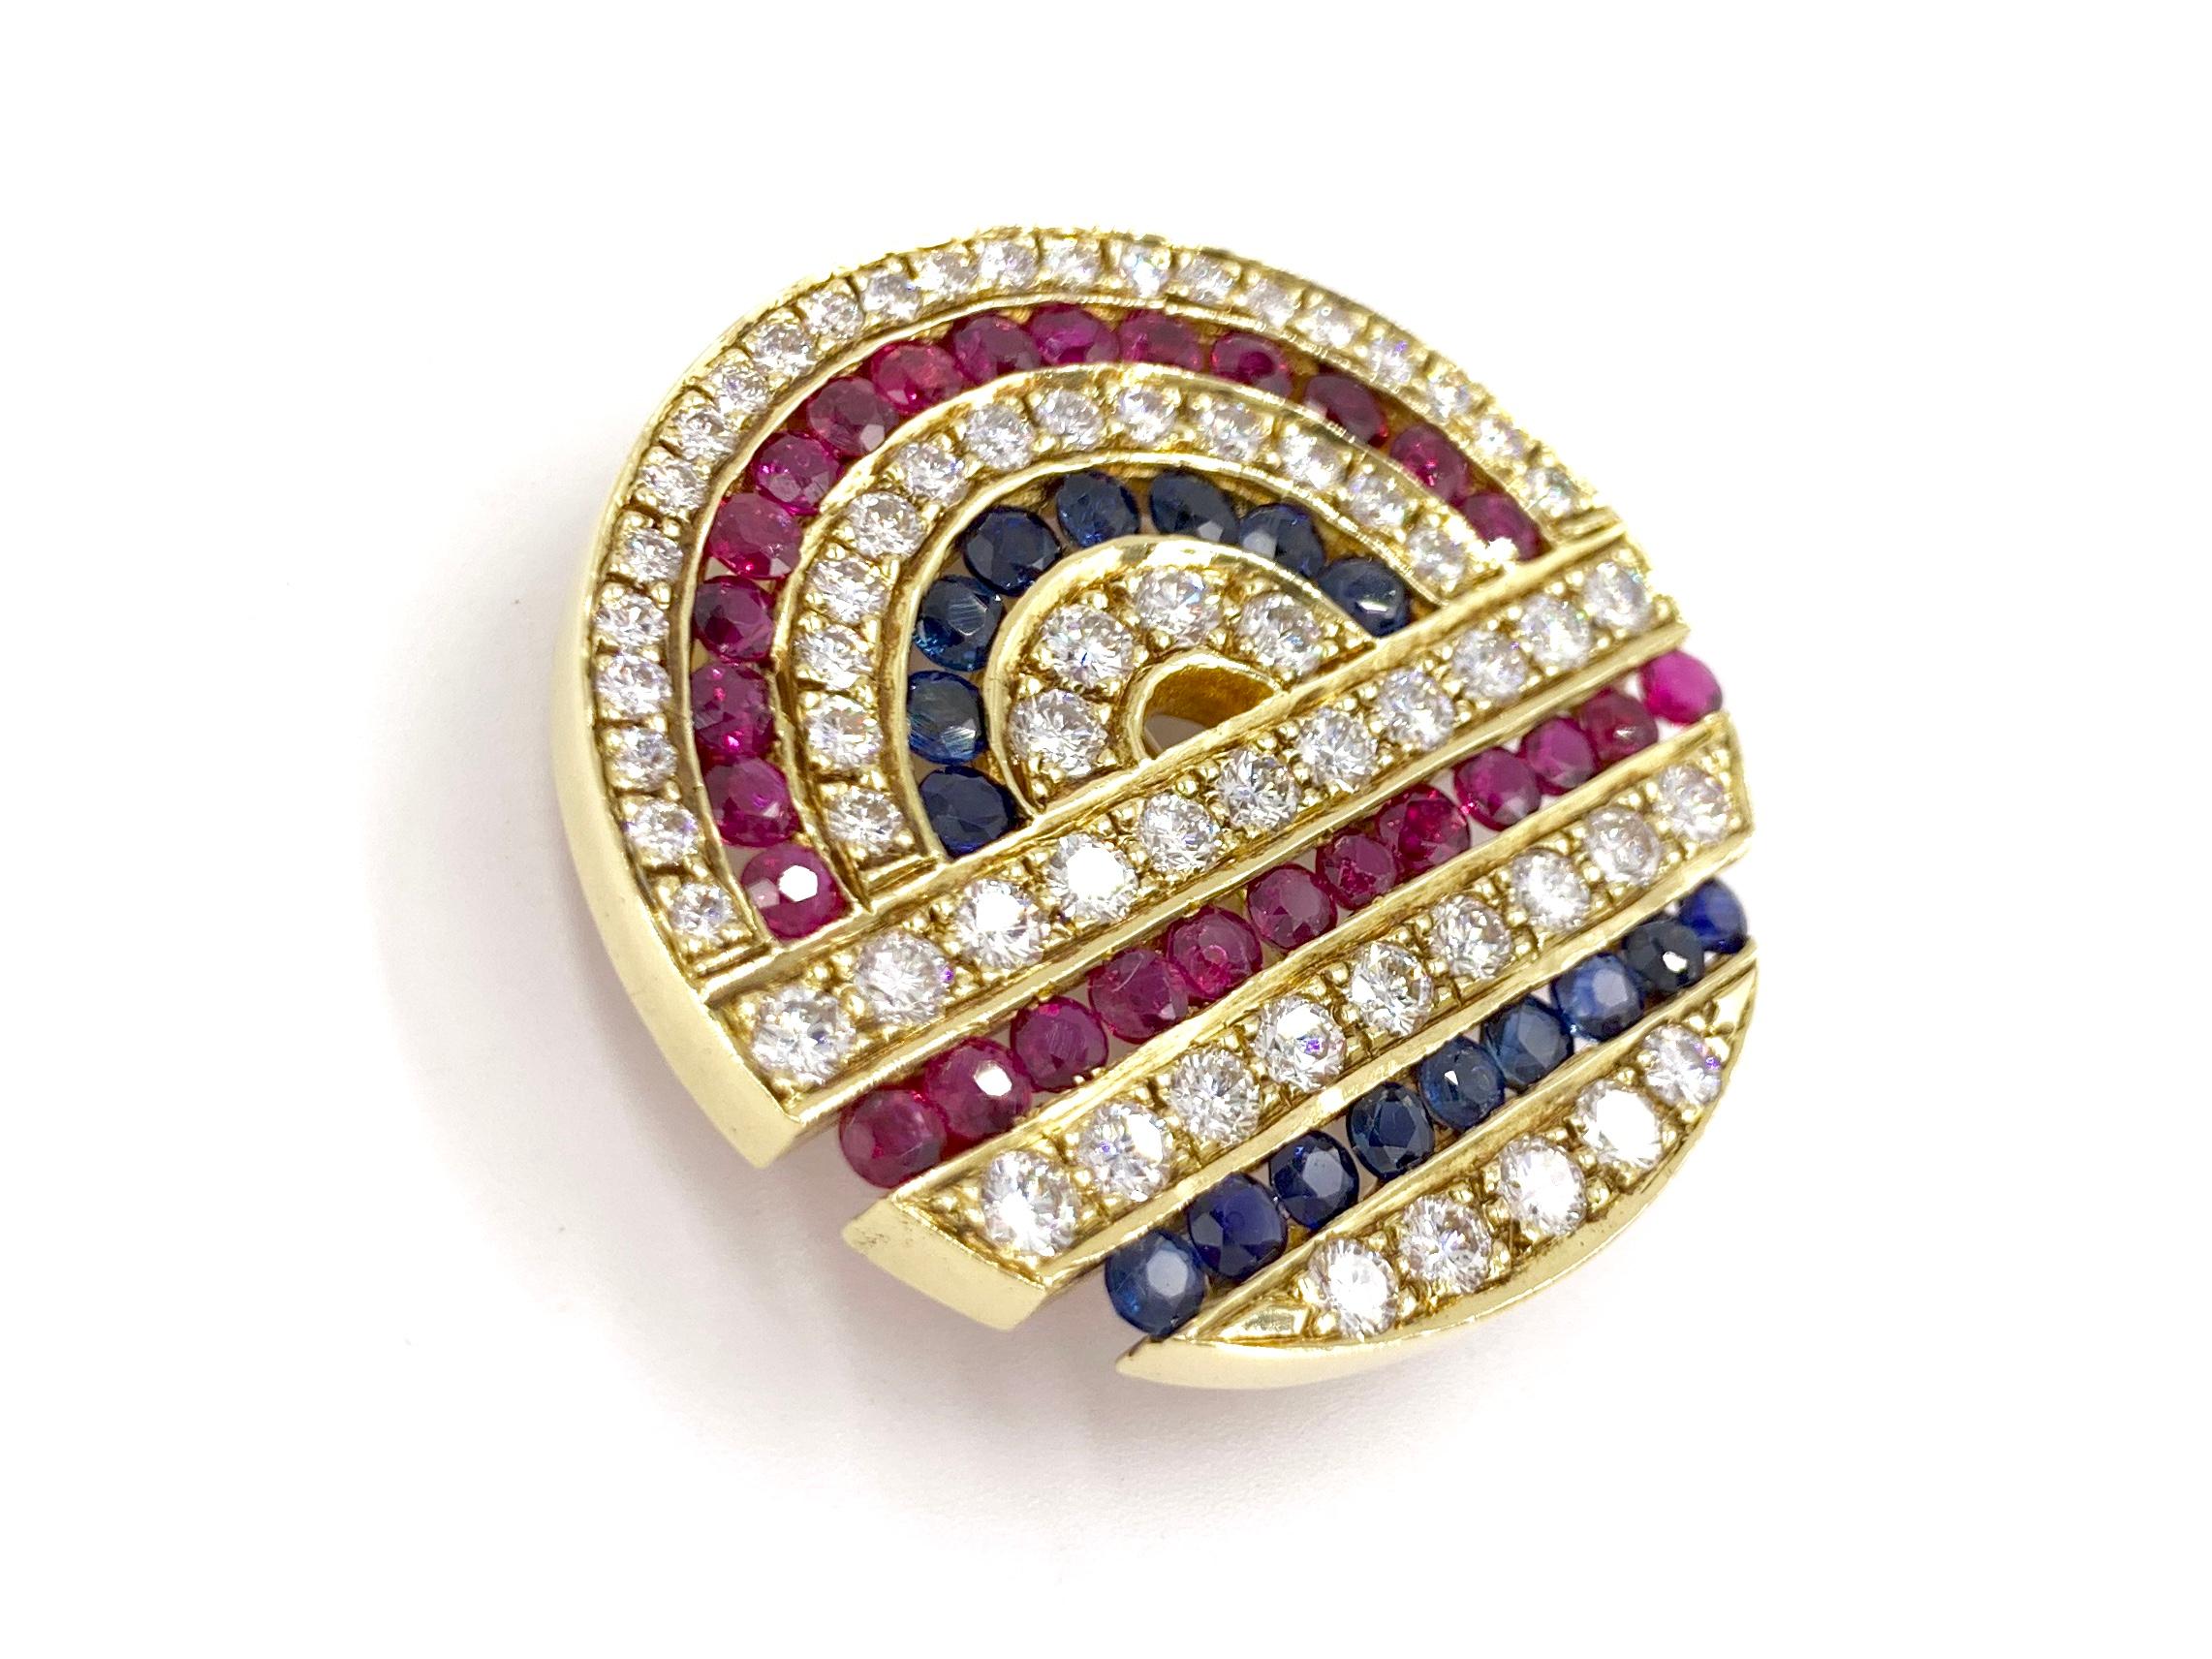 A substantial and very well made round 18 karat gold, diamond and precious gemstone medallion slide pendant that doubles as a brooch. This 34mm slide pendant has a generous amount of sparkle with a combined total weight of 8.33 carats of high